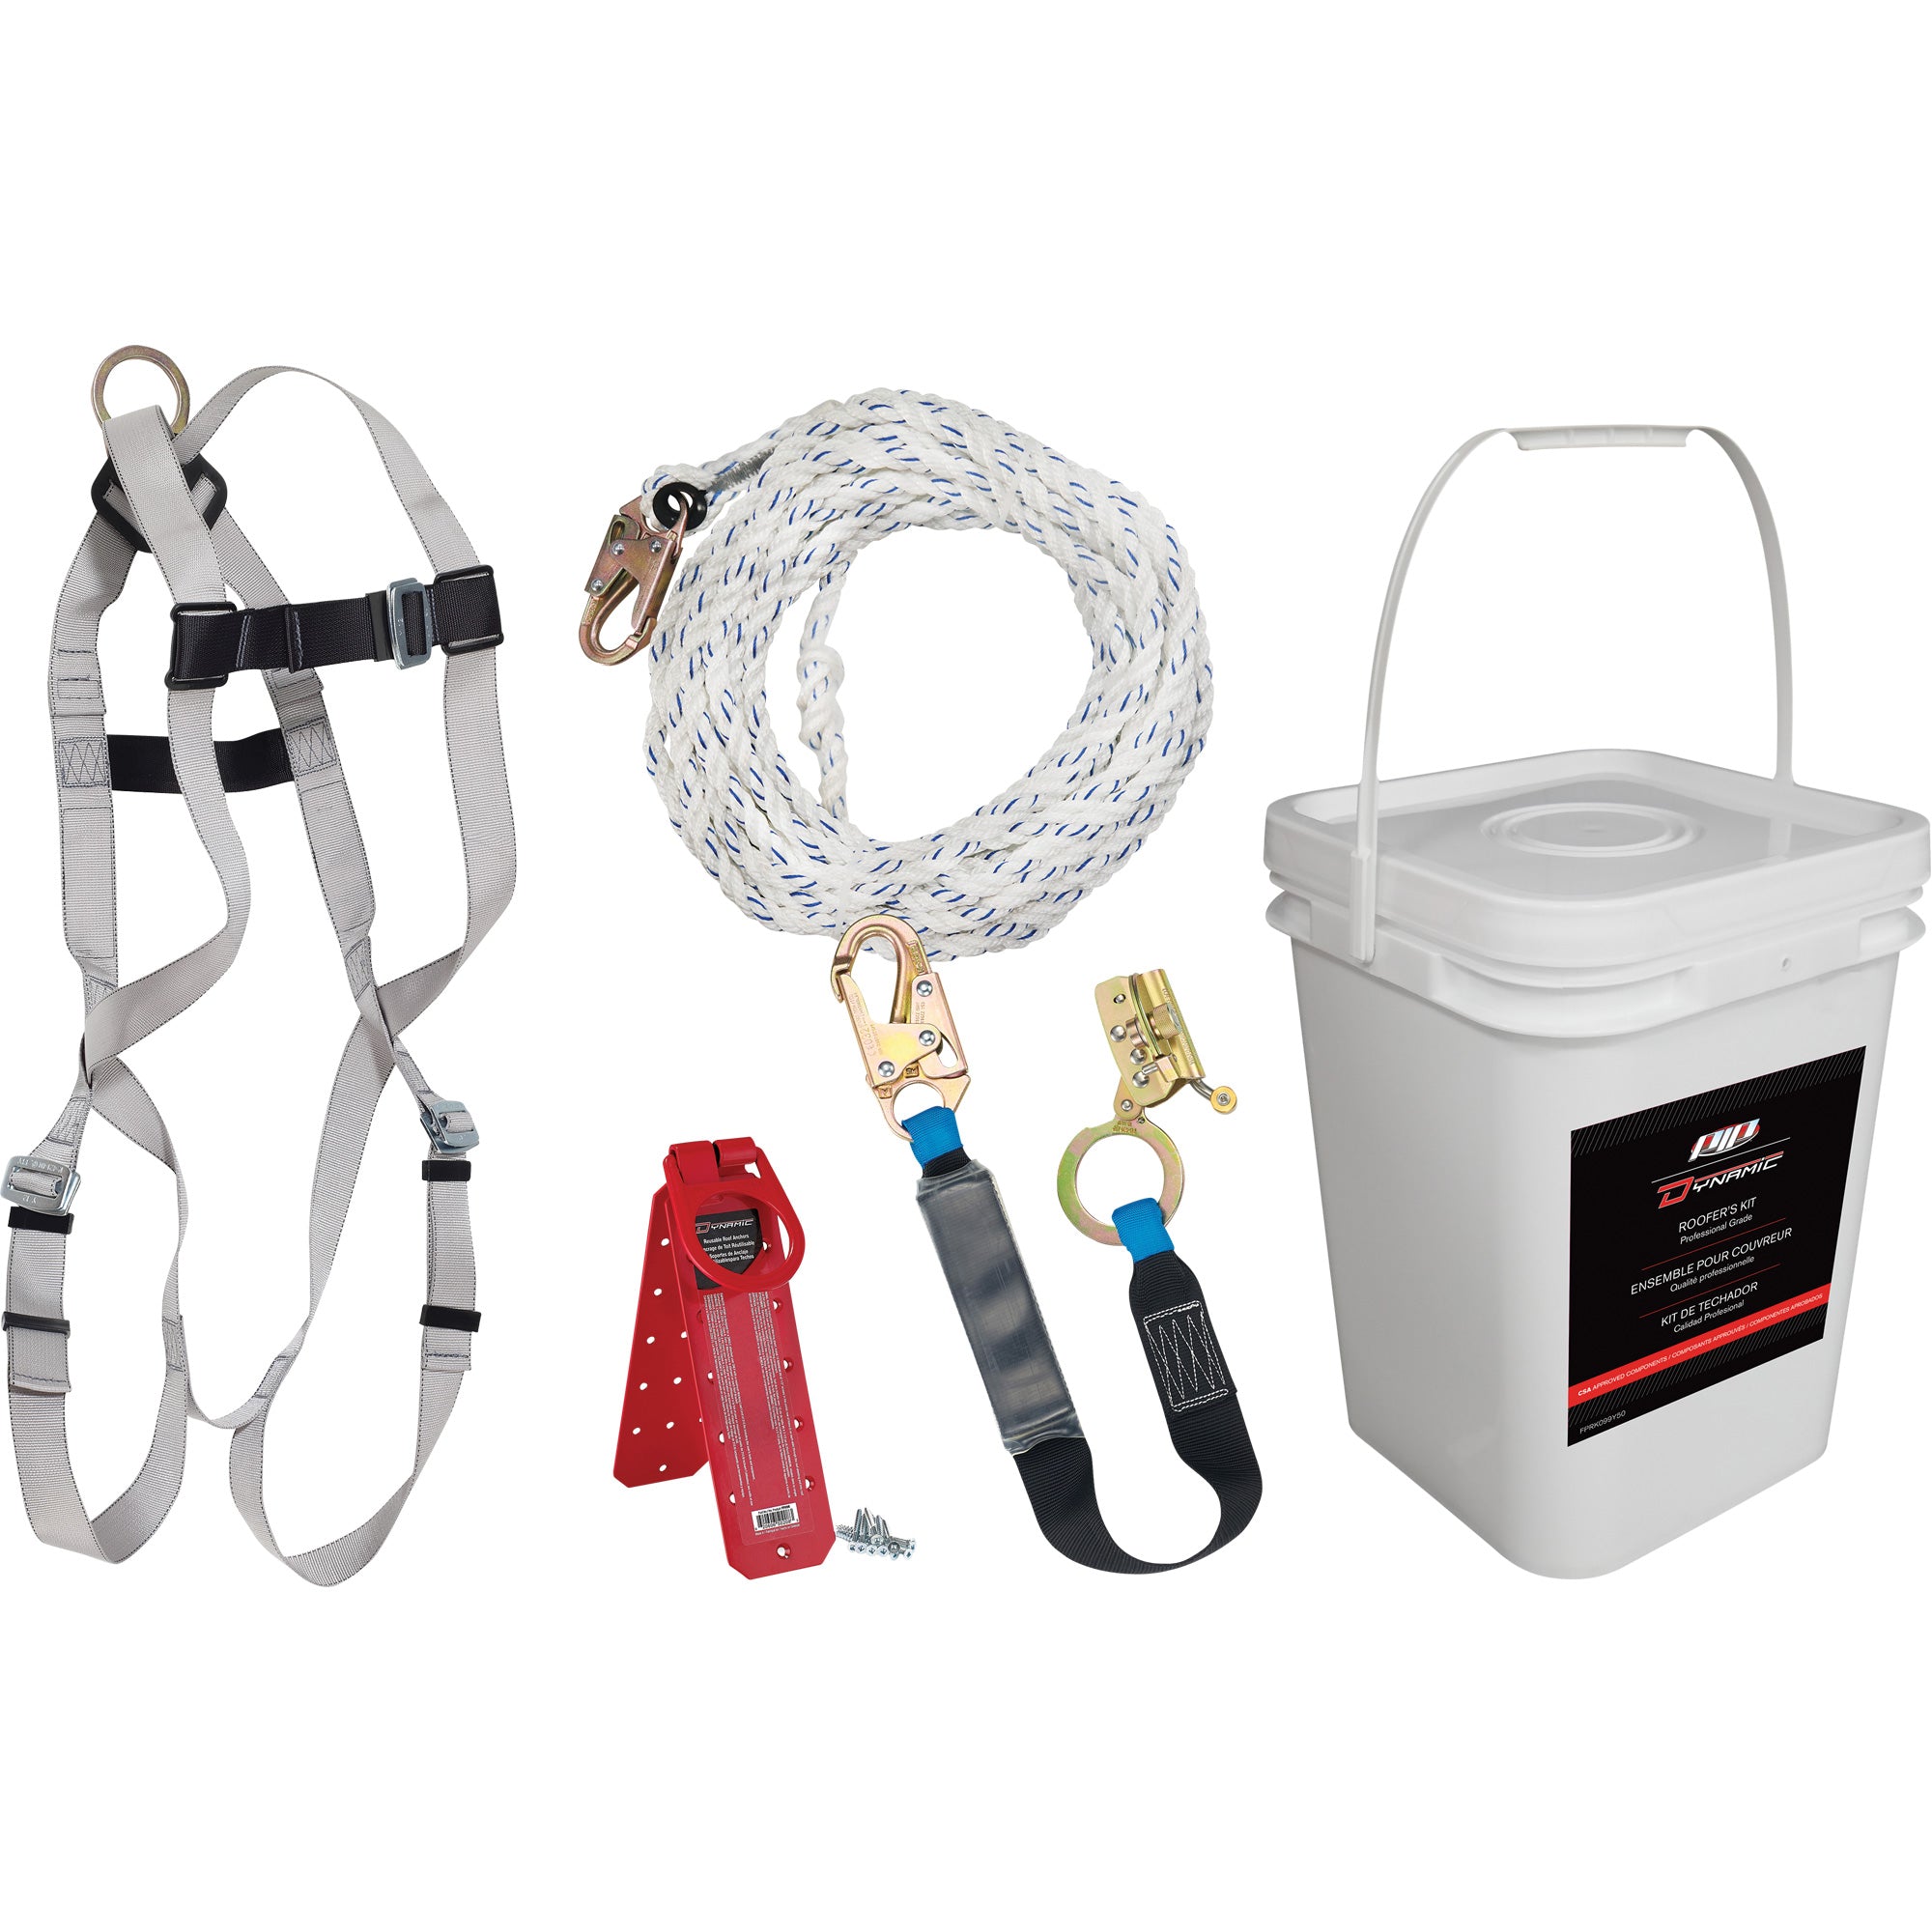 Protective Industrial Products FPRK099Y50 Dynamic Fall Protection Kit, Roofer's Kit